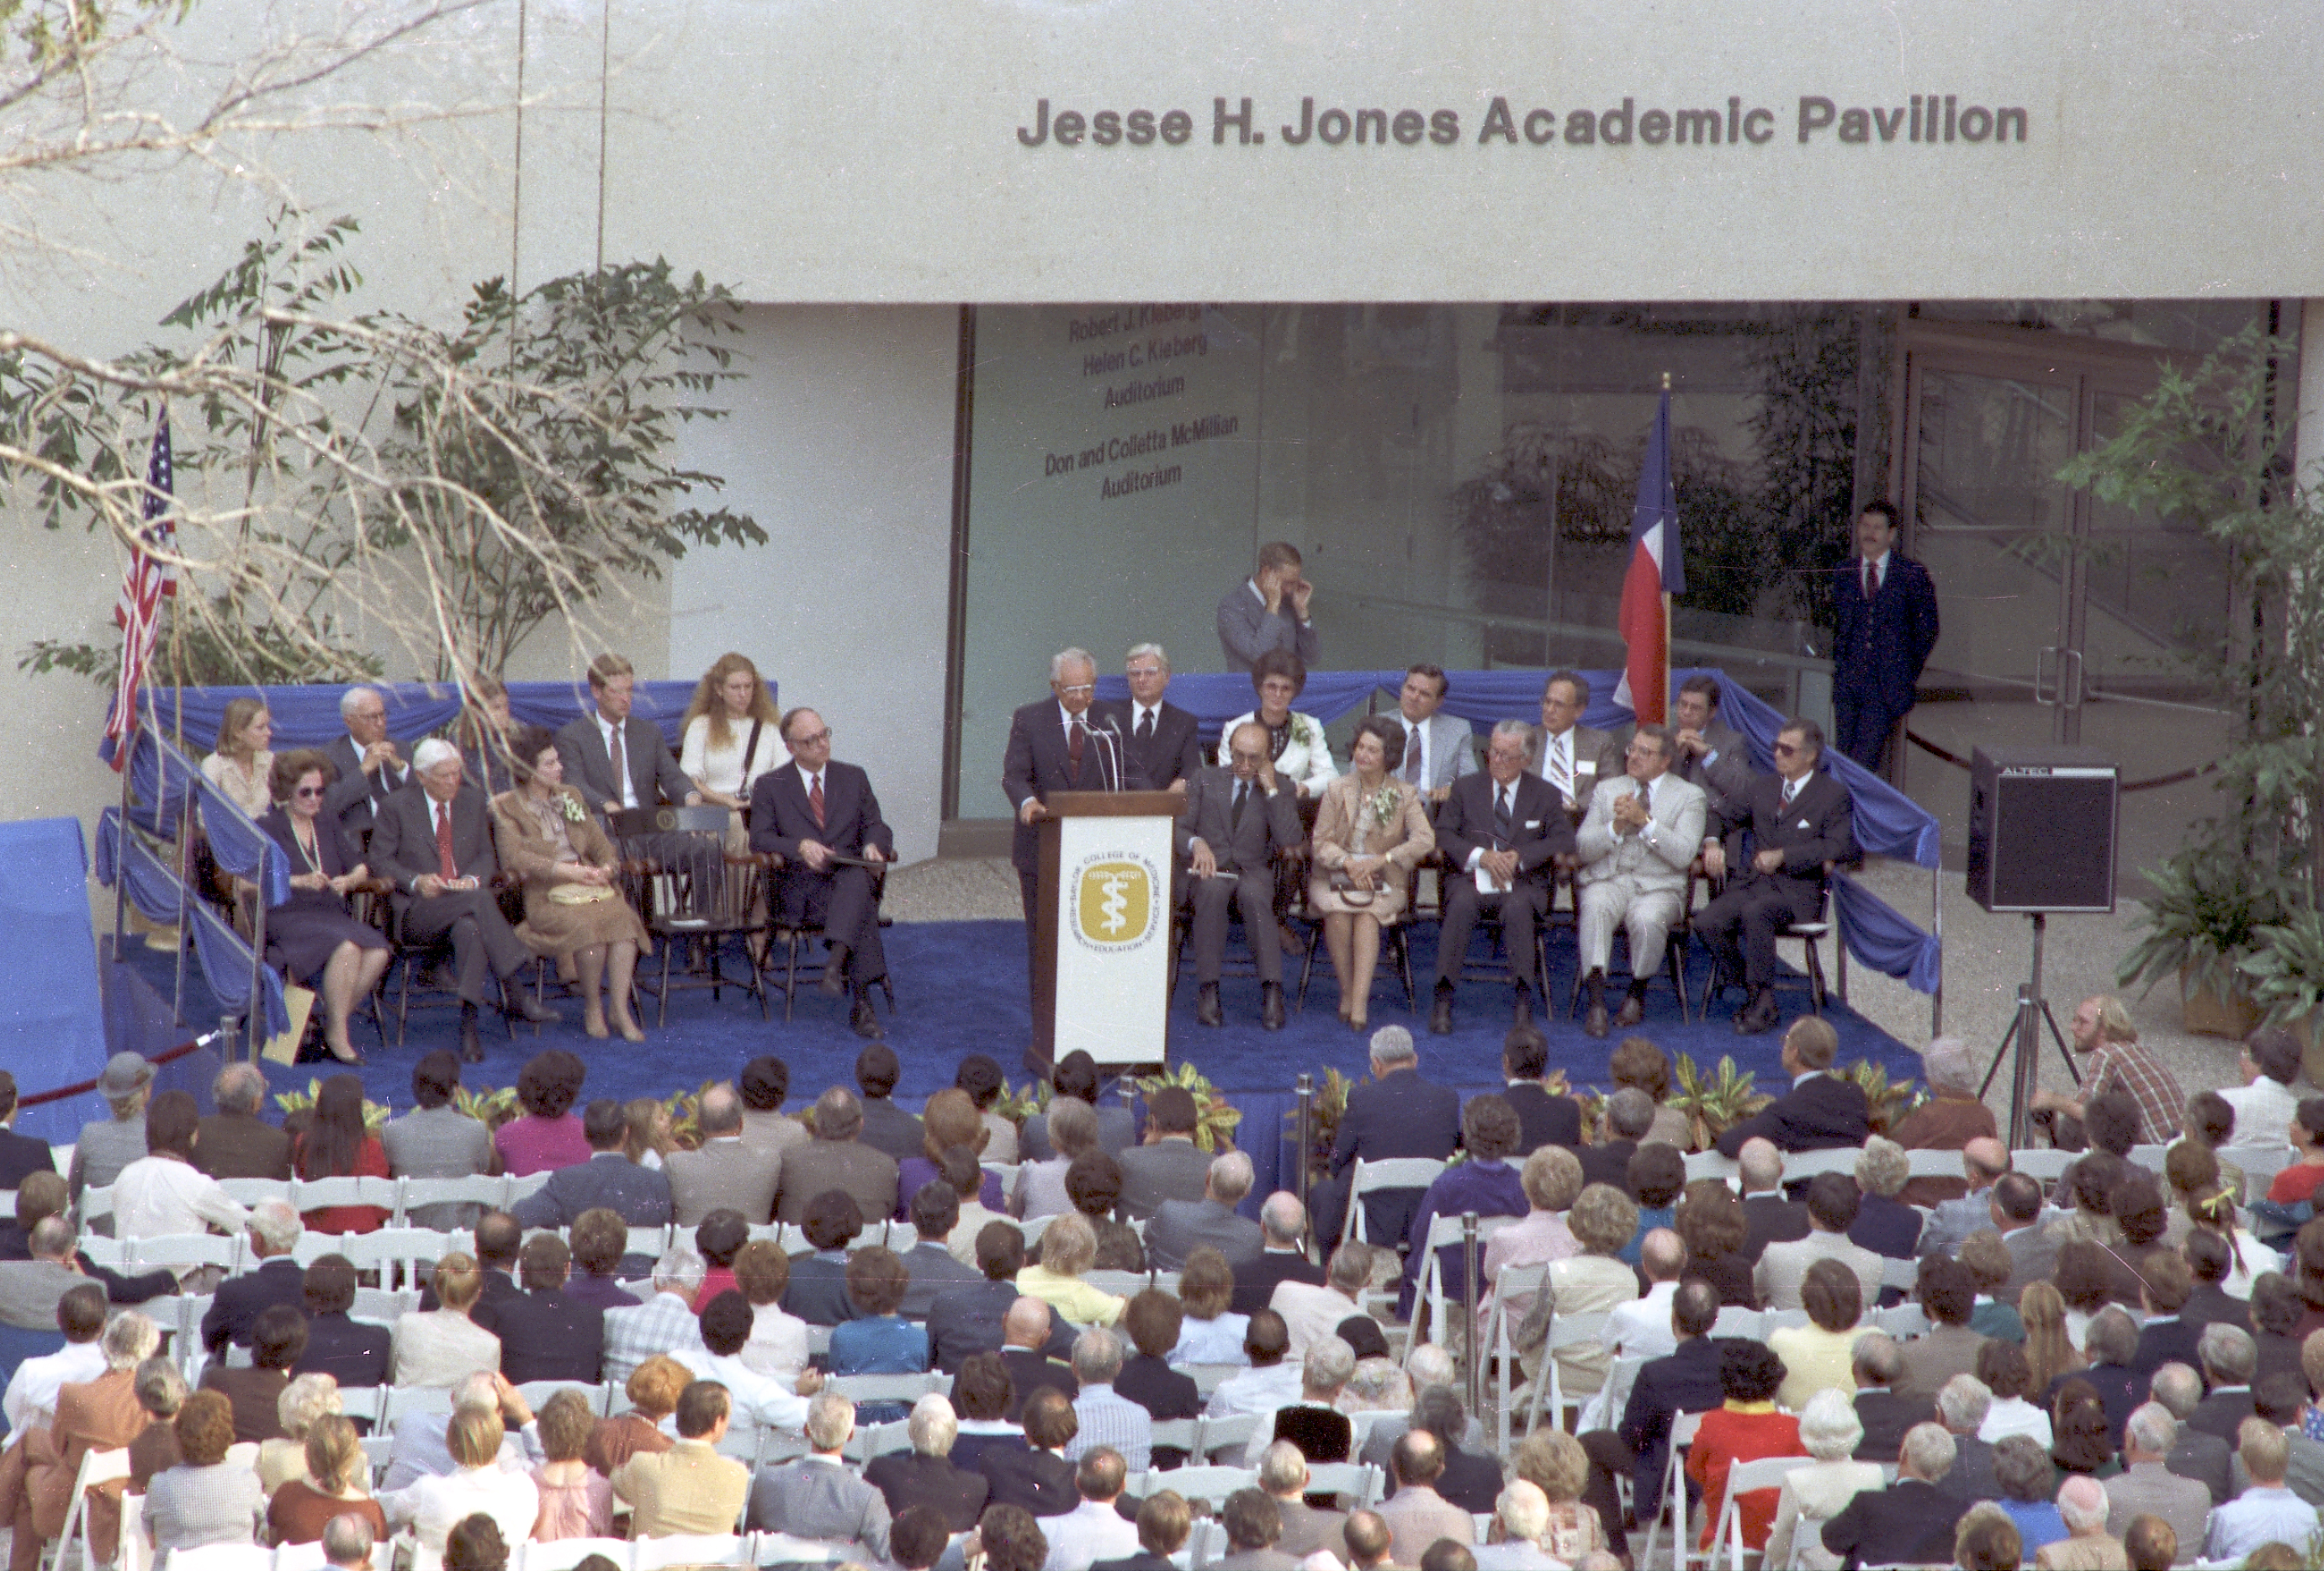 Leon Jaworski spoke at the dedication of the Michael E. DeBakey Center for Biomedical Education and Research. Platform guests, front row, left to right, Mary Lasker, George R. Brown, Jo Murphy, William T. Butler, Michael E. DeBakey, Lady Bird Johnson, Leonard F. McCollum, Julius C. Pericola, Henry J.N. Taub; back row, Emory G. Alexander, Herman P. Pressler, Helenita Alexander, John D. Alexander, Jr., Henrietta Alexander, B.J. Martin, Colletta McMillian, Don McMillian, Harris Busch, Jerry Lewis. Photo courtesy Baylor College of Medicine Archives.